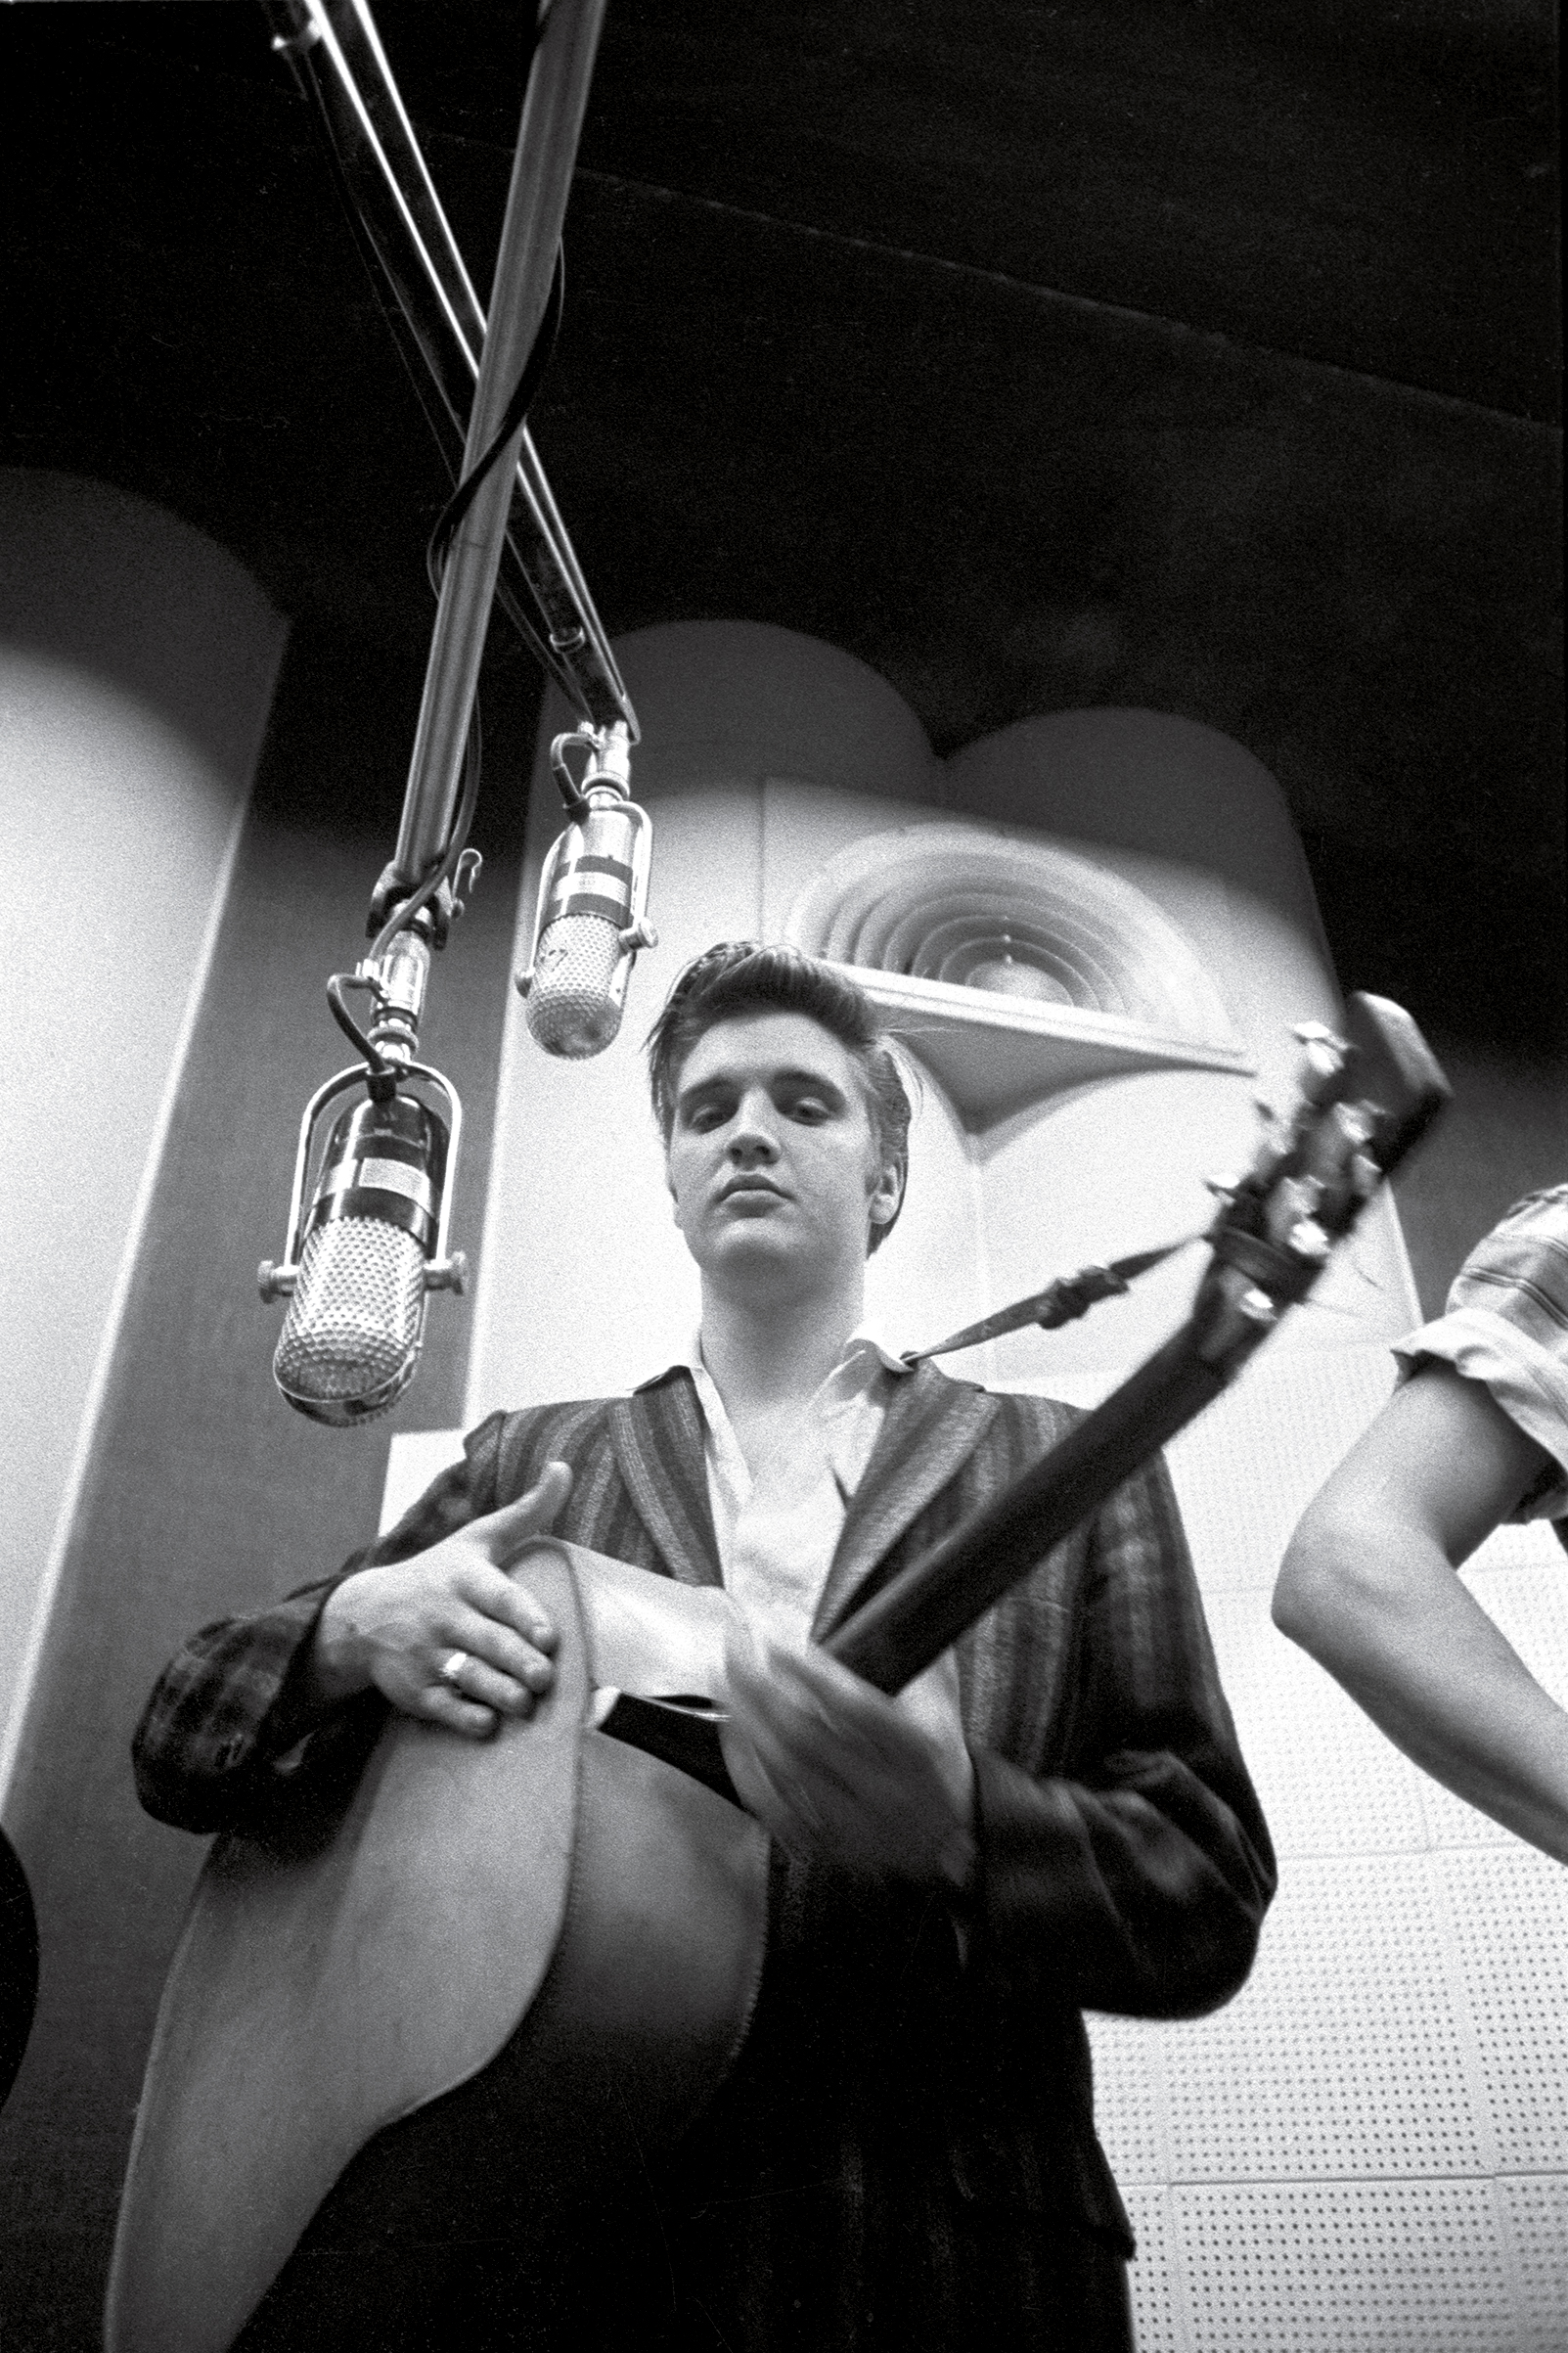 Elvis Presley recording at RCA Victor Studio in New York City in July 1956. (Alfred Wertheimer—Getty Images)